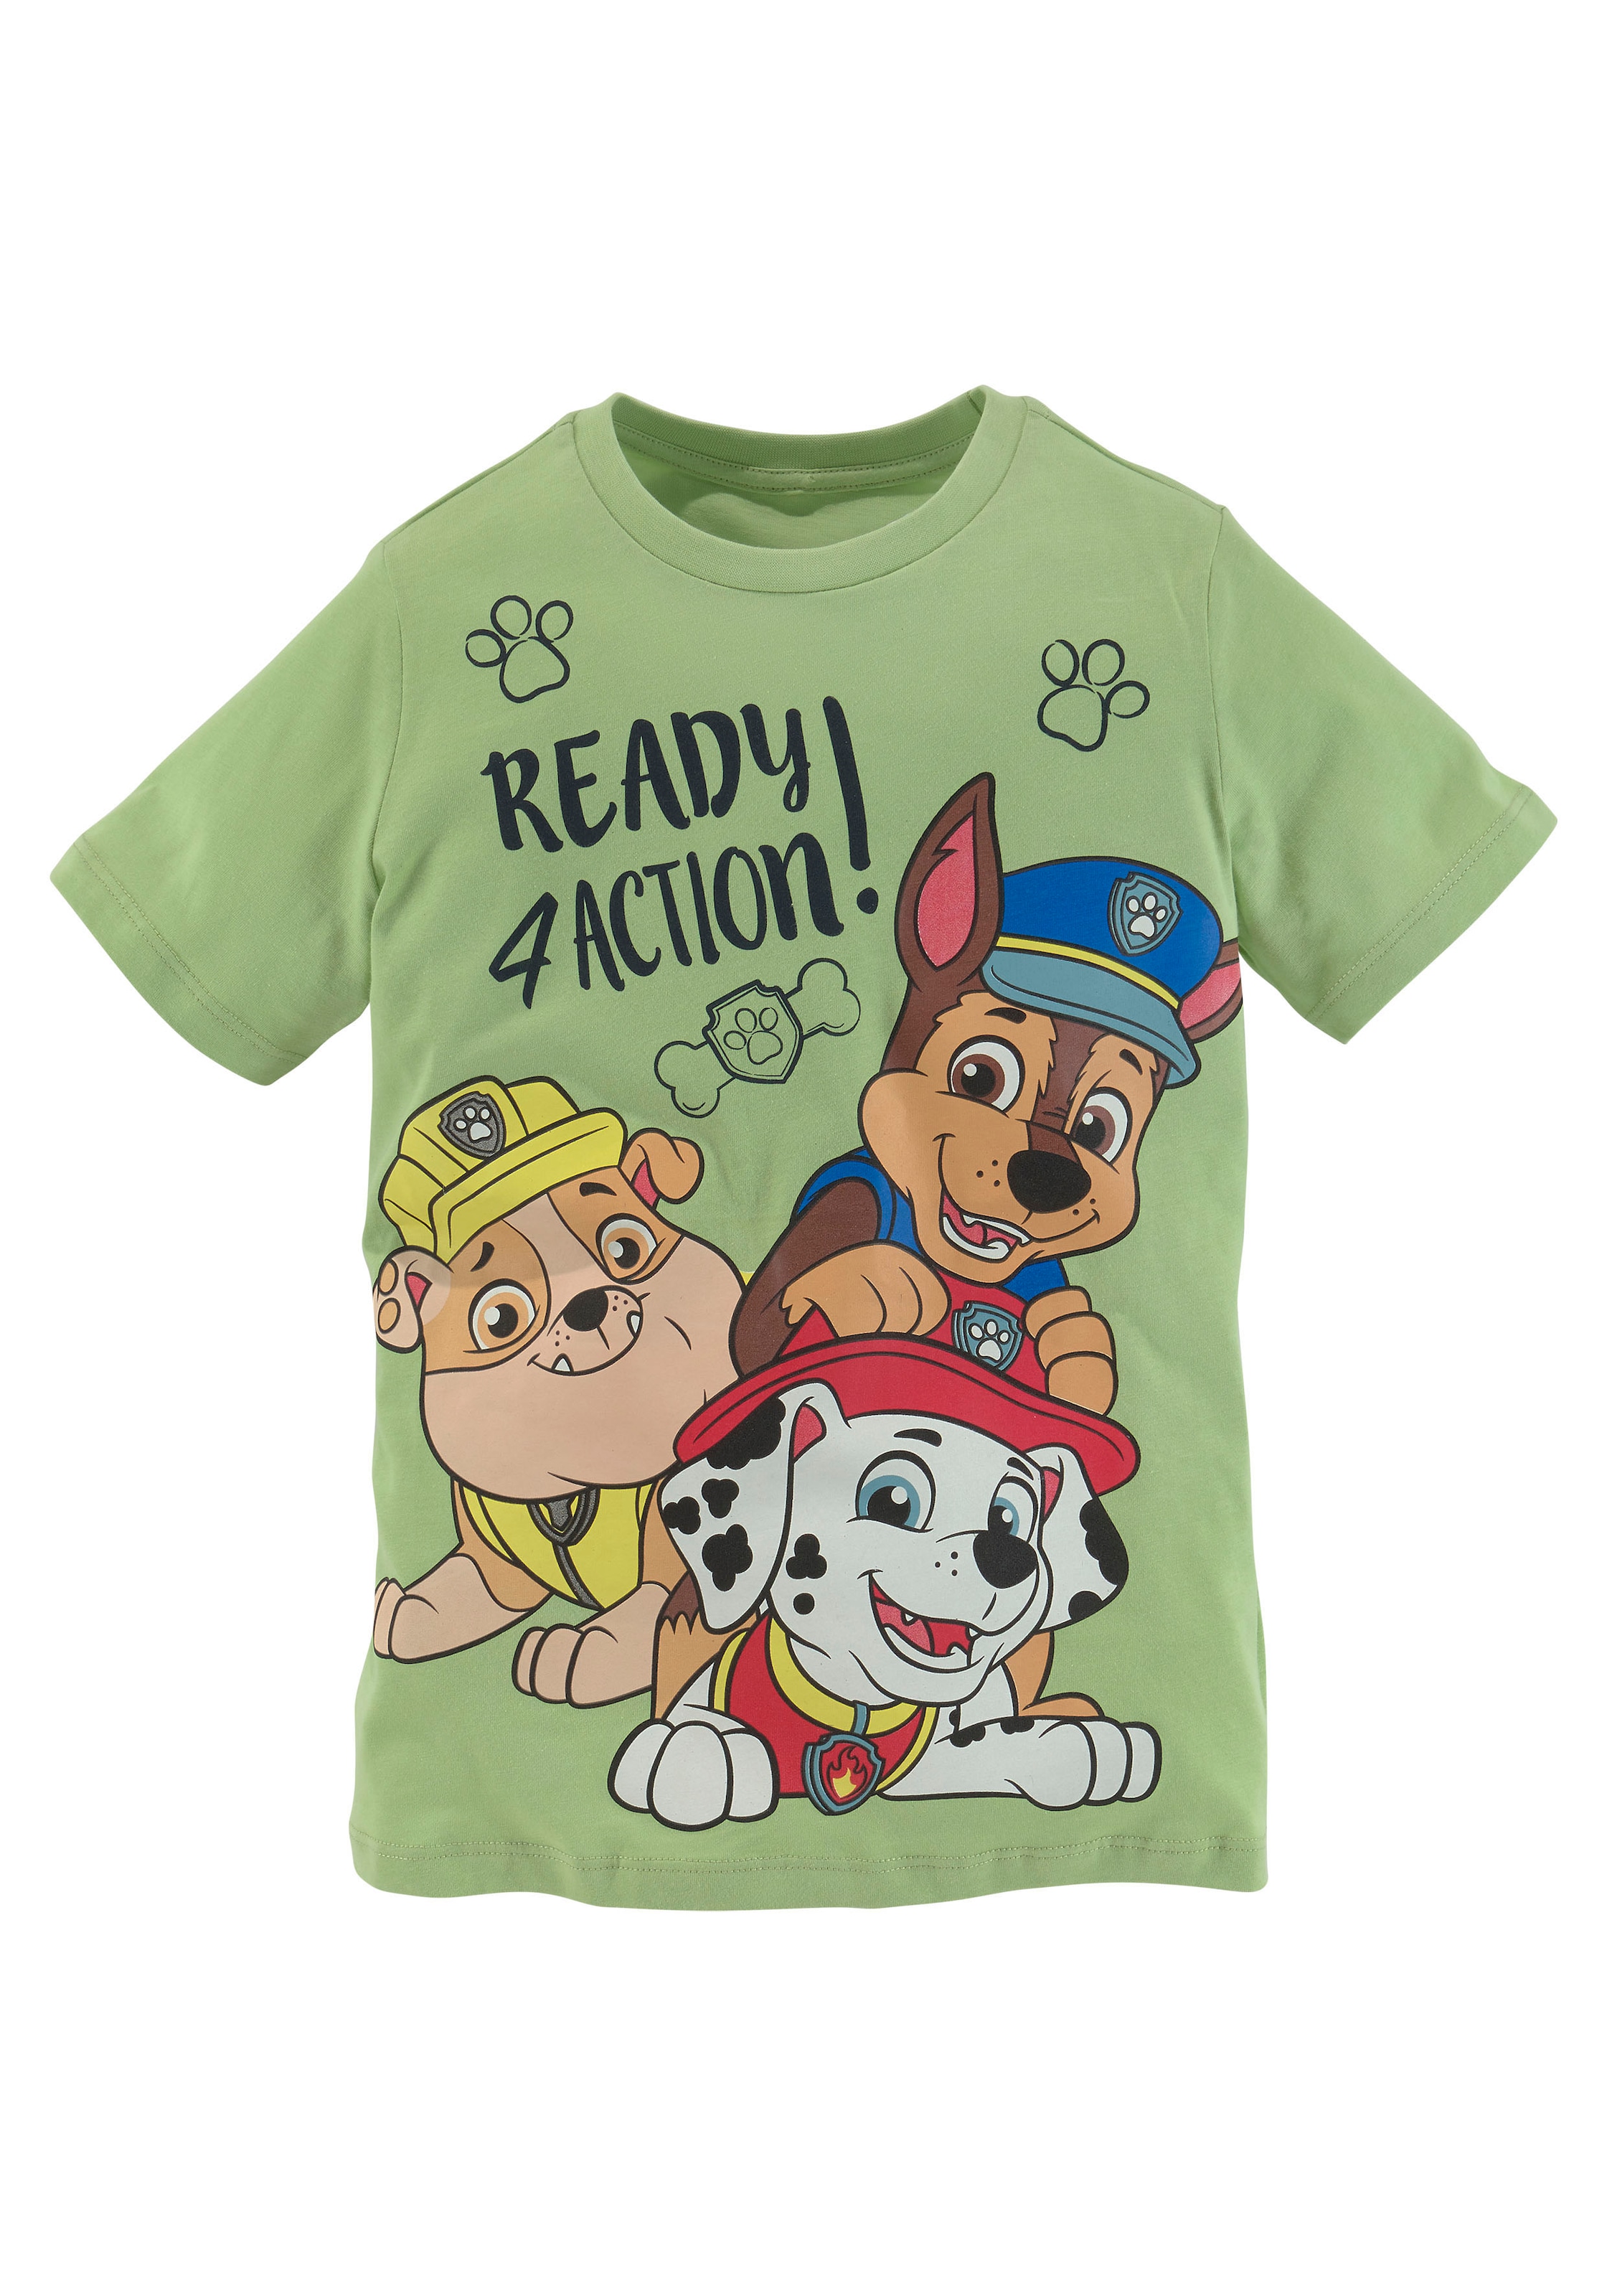 PAW PATROL T-Shirt »Ready OTTO bei 4 online action!«